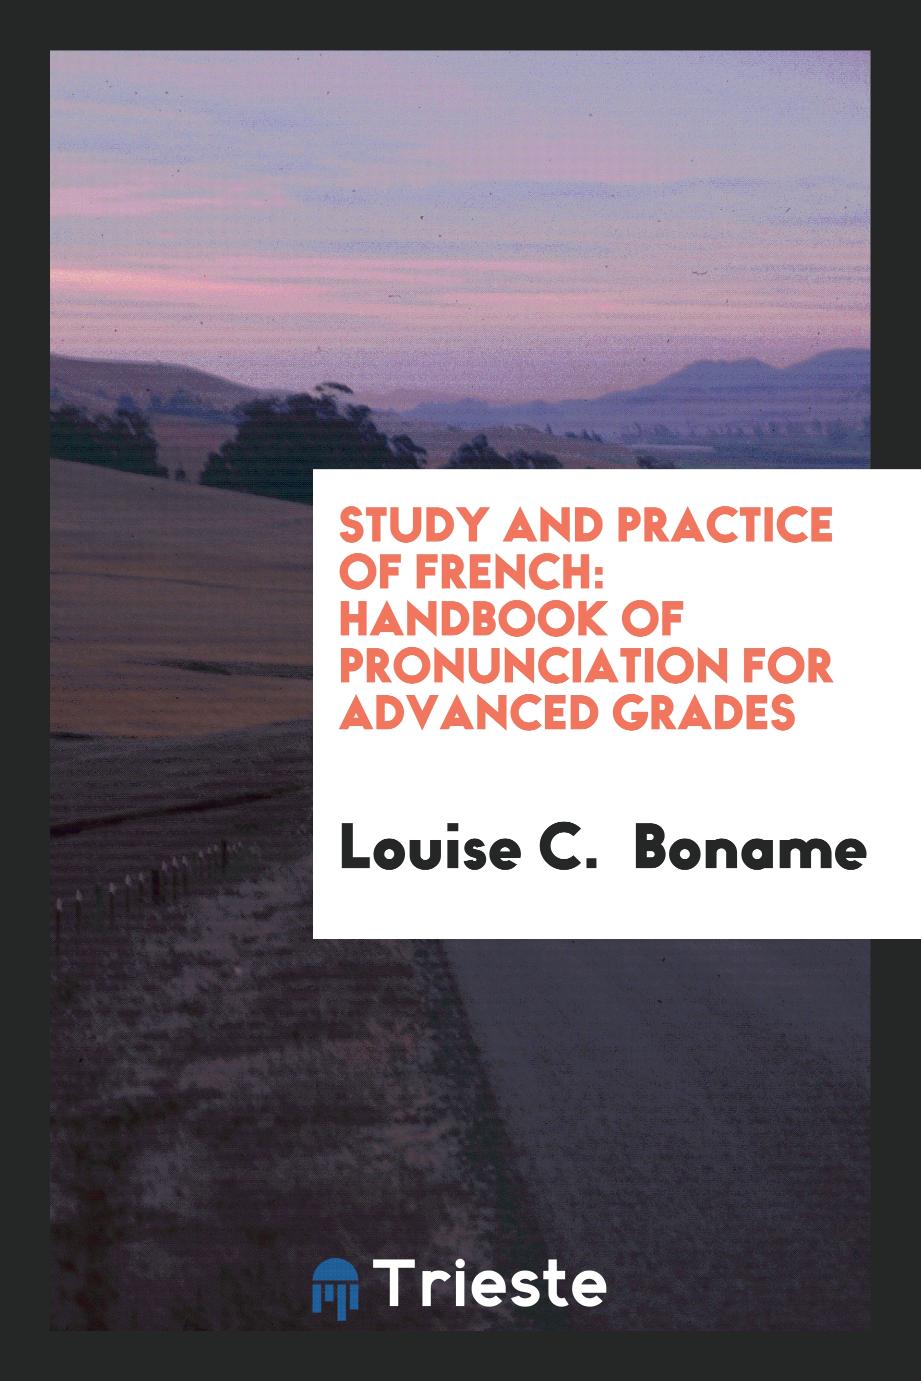 Study and Practice of French: Handbook of Pronunciation for Advanced Grades